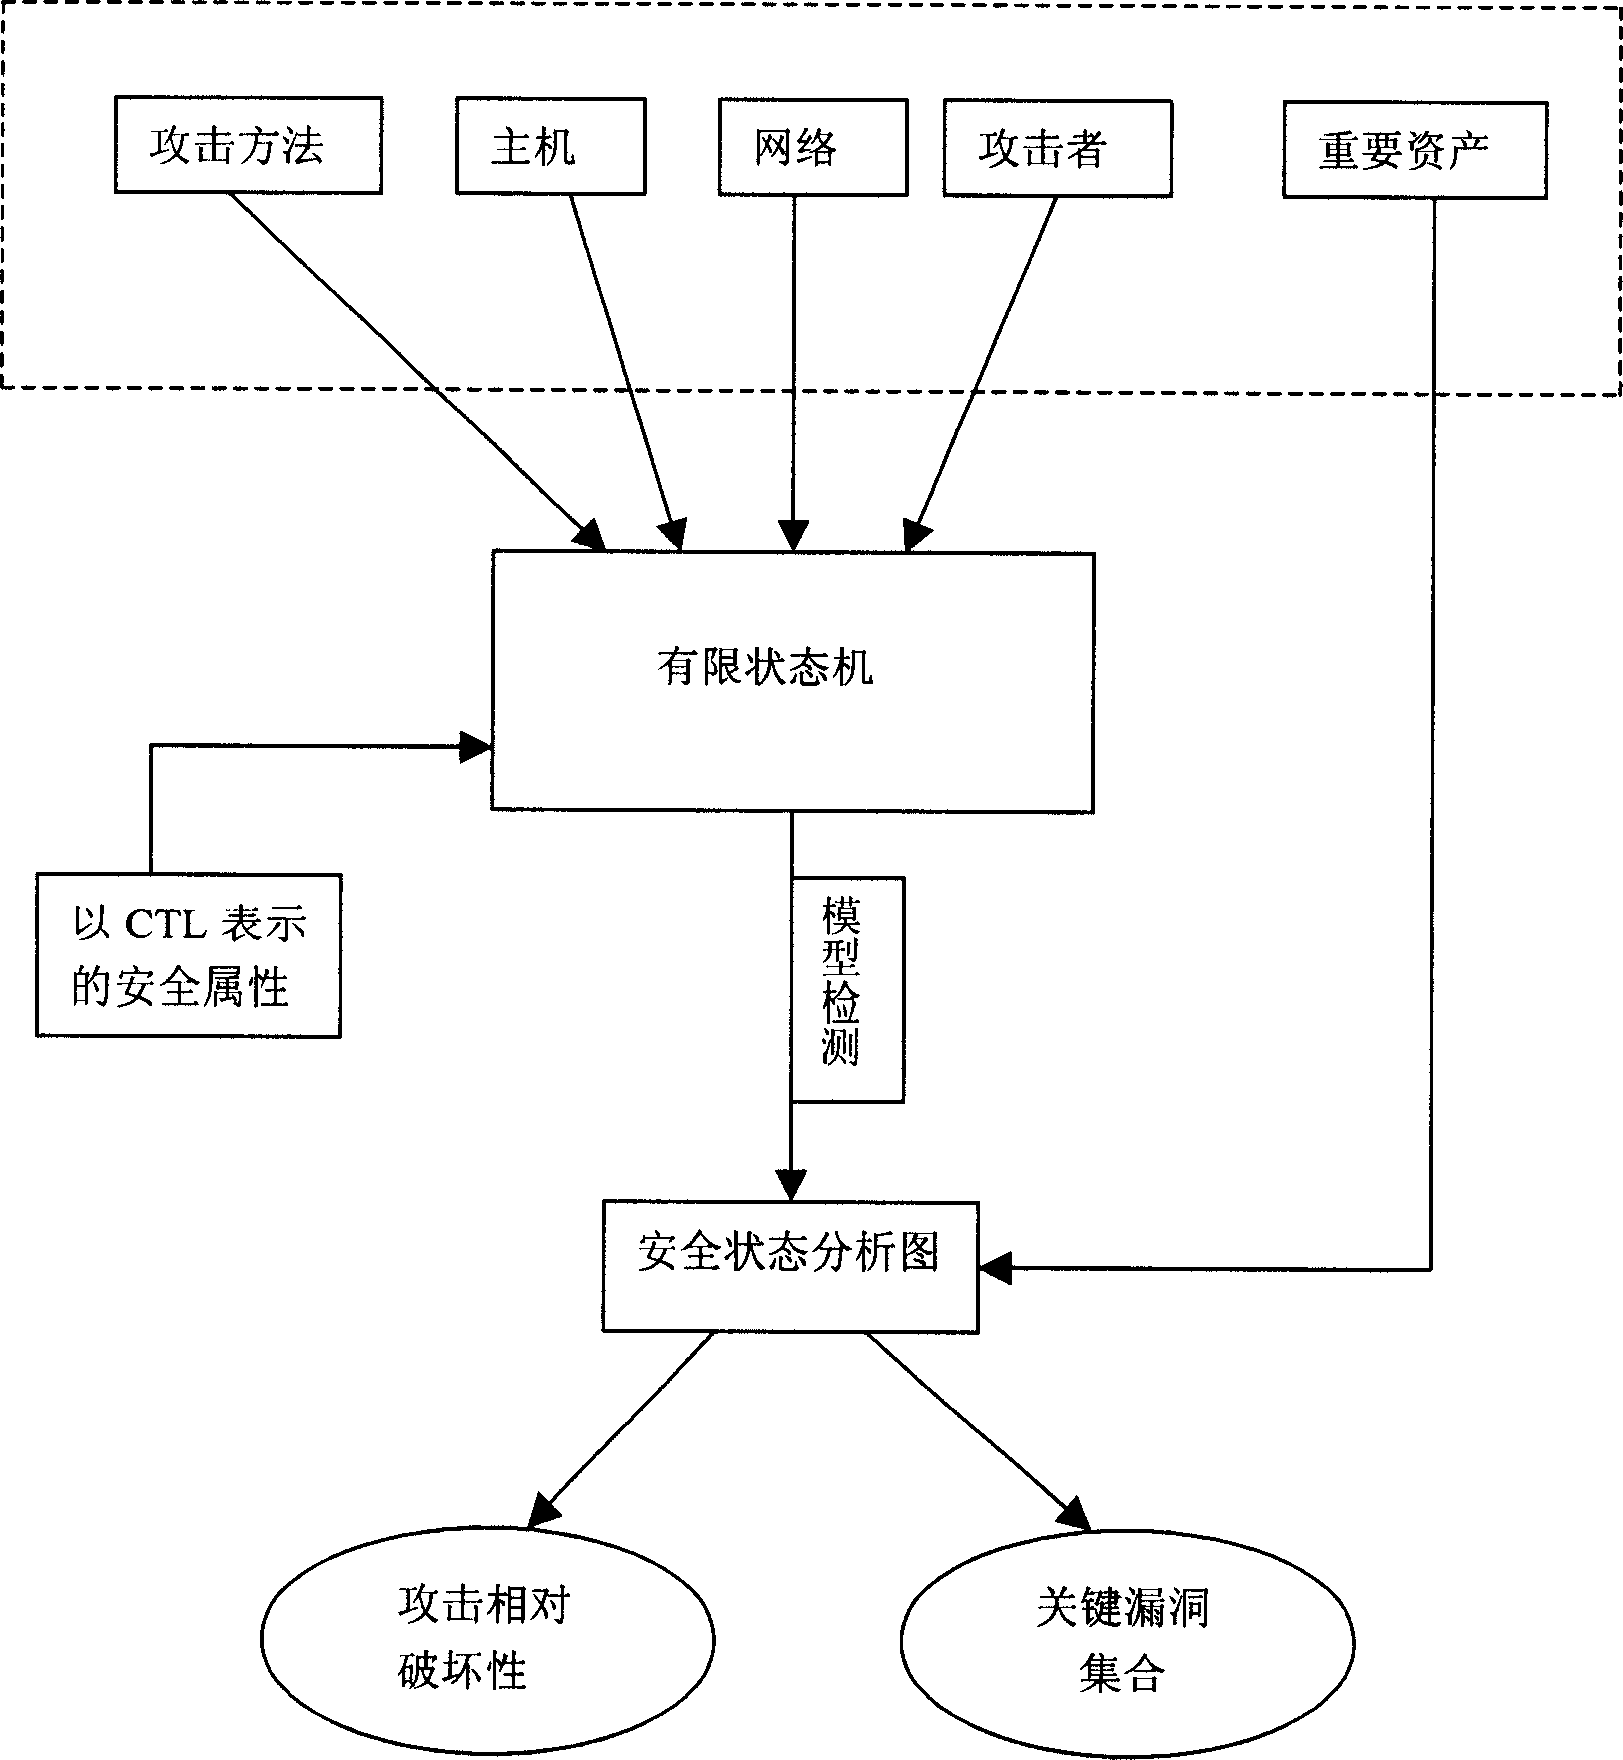 Method for analysing large scale network safety